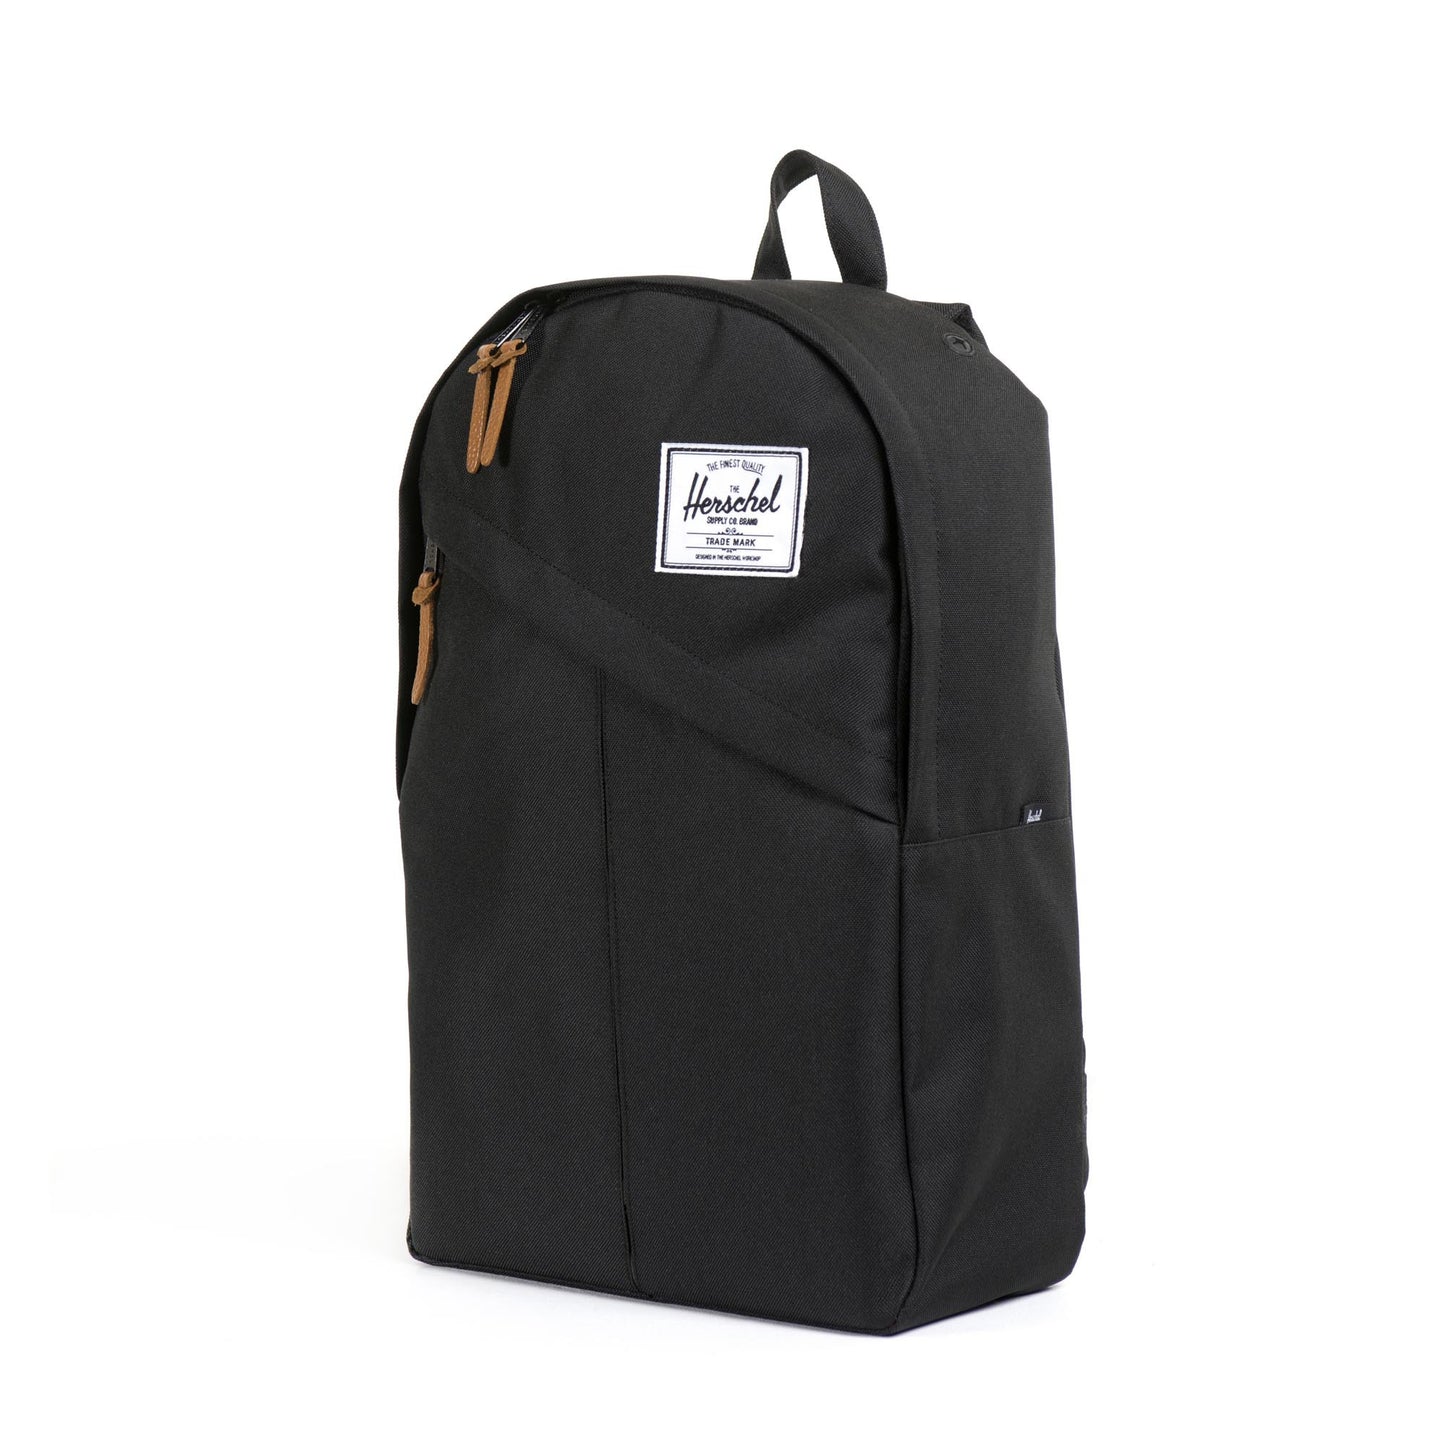 Herschel Supply Co. - Parker Backpack, Black - The Giant Peach